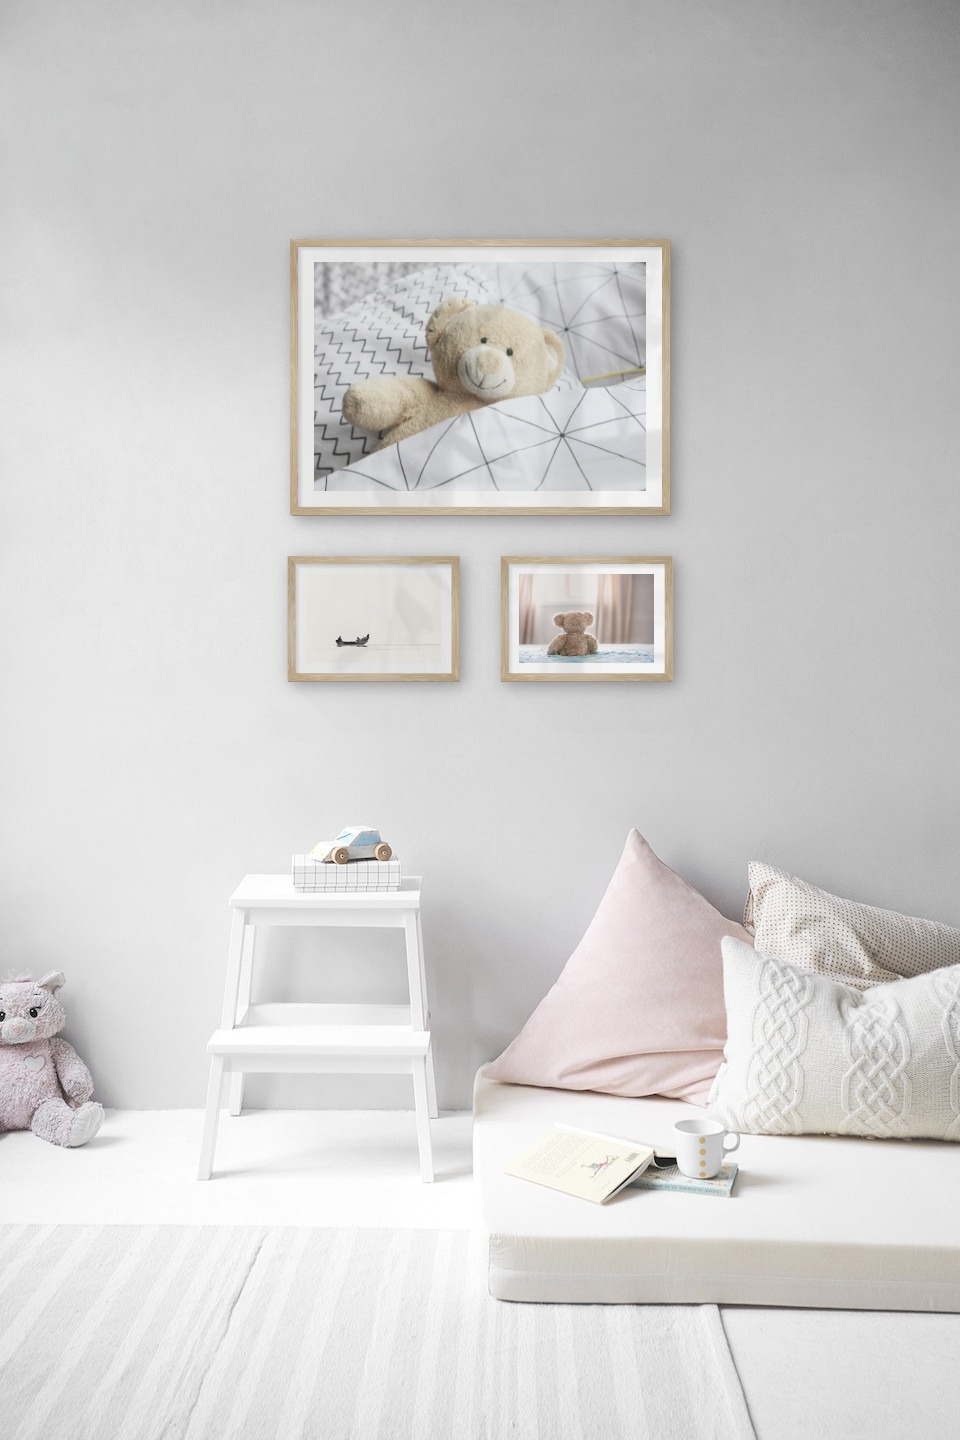 Gallery wall with picture frames in wood in sizes 50x70 and 21x30 with prints "Teddy bear in bed", "People in boat" and "Teddy bear in front of window"